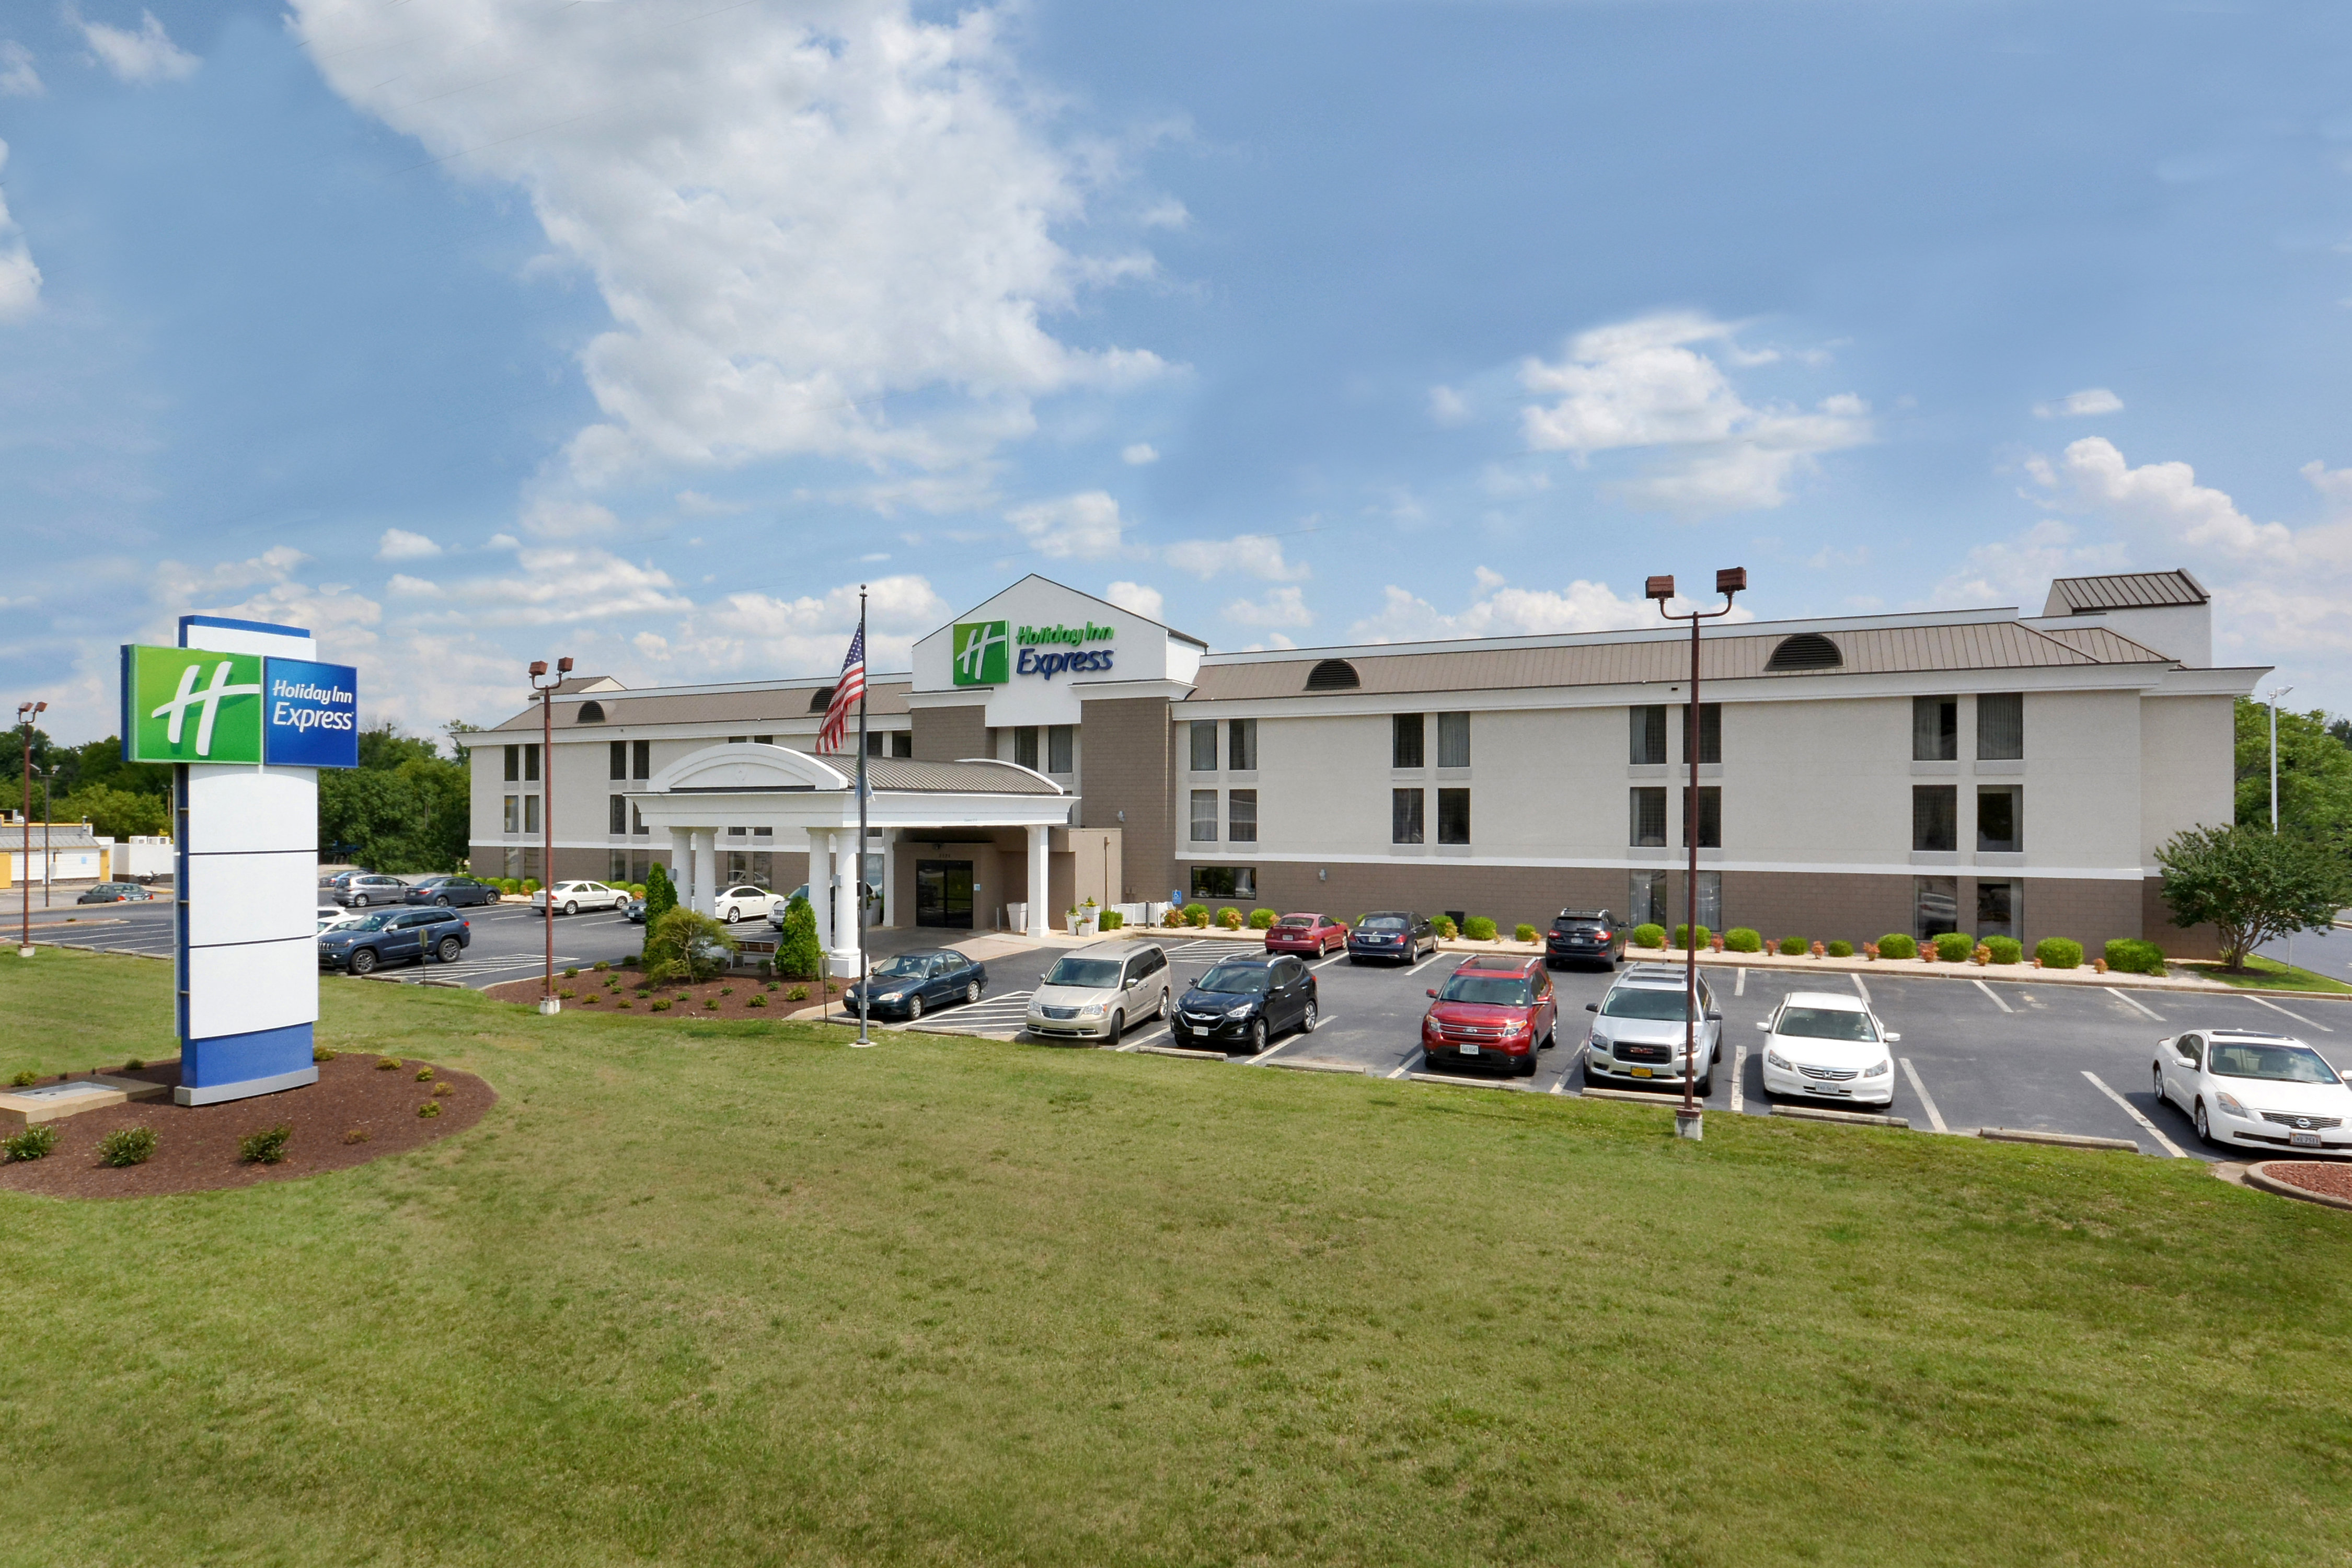 Welcome to our Danville, VA hotel on Riverside Drive.